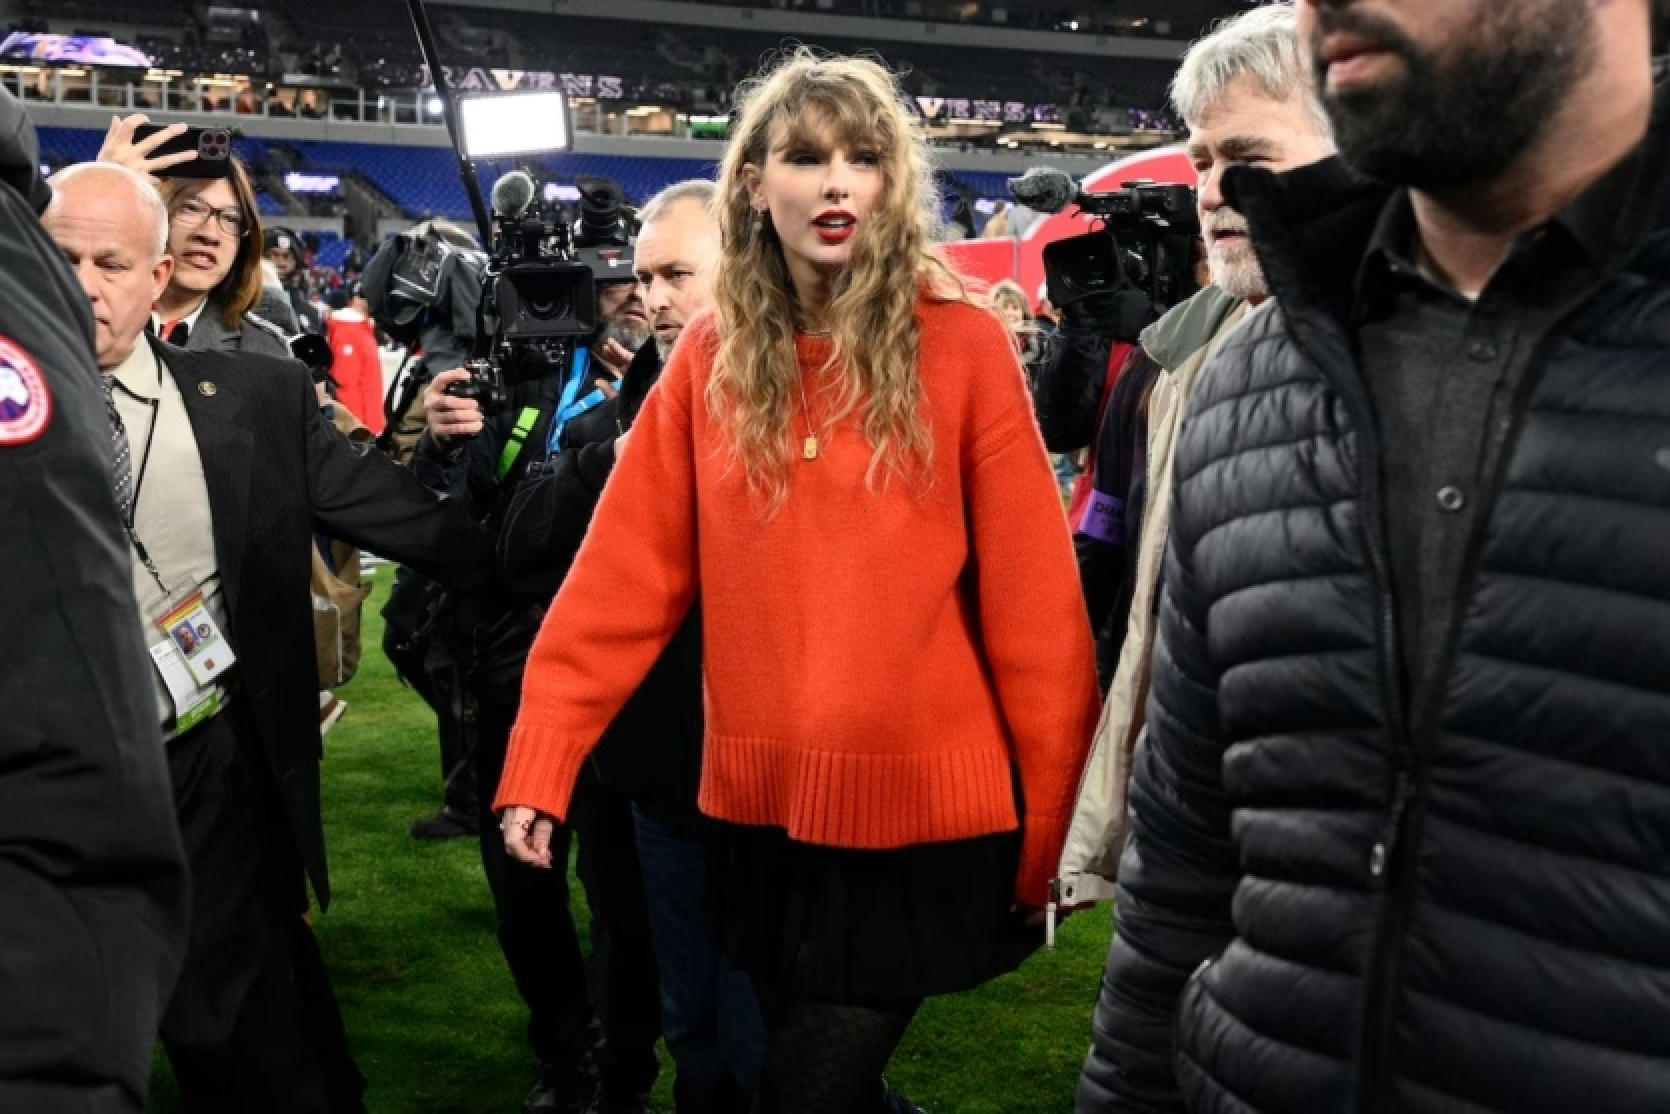 Taylor Swift silences student who tracked her plane's data - previously sued by Ilon Musk